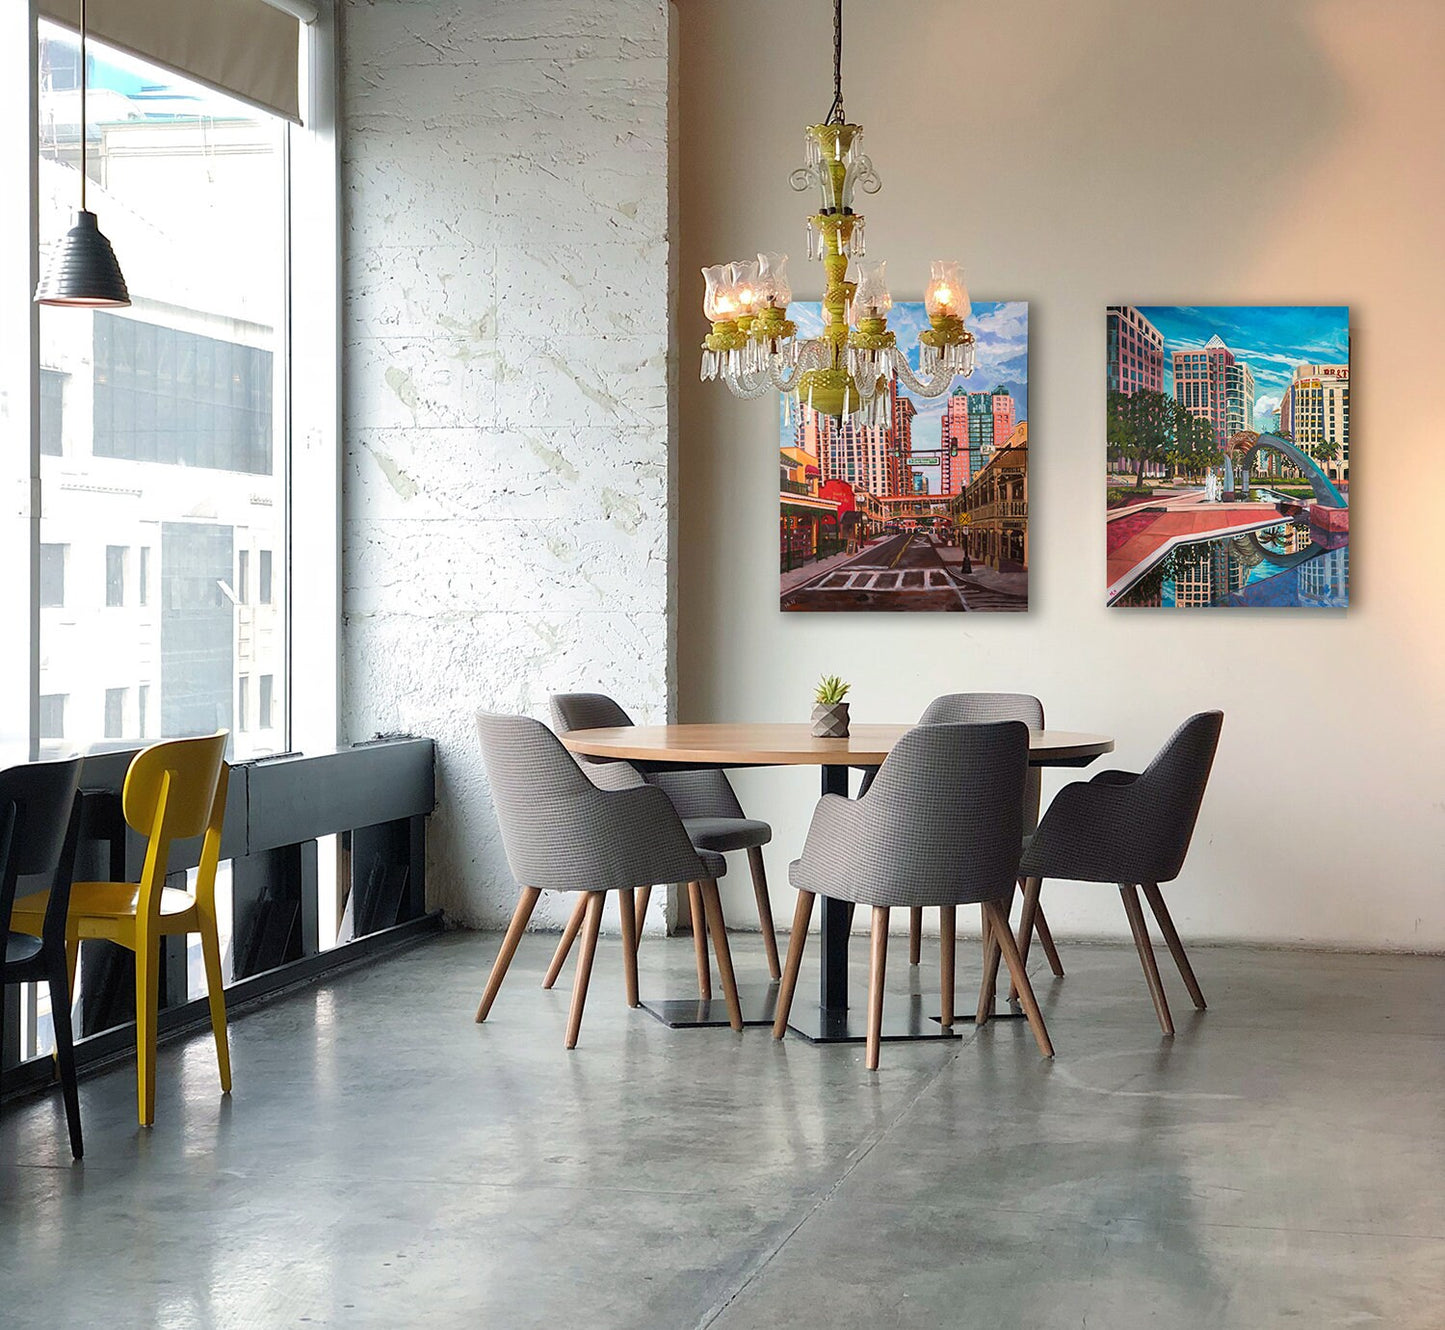 two paintings of downtown orlando florida in an high rise dining area